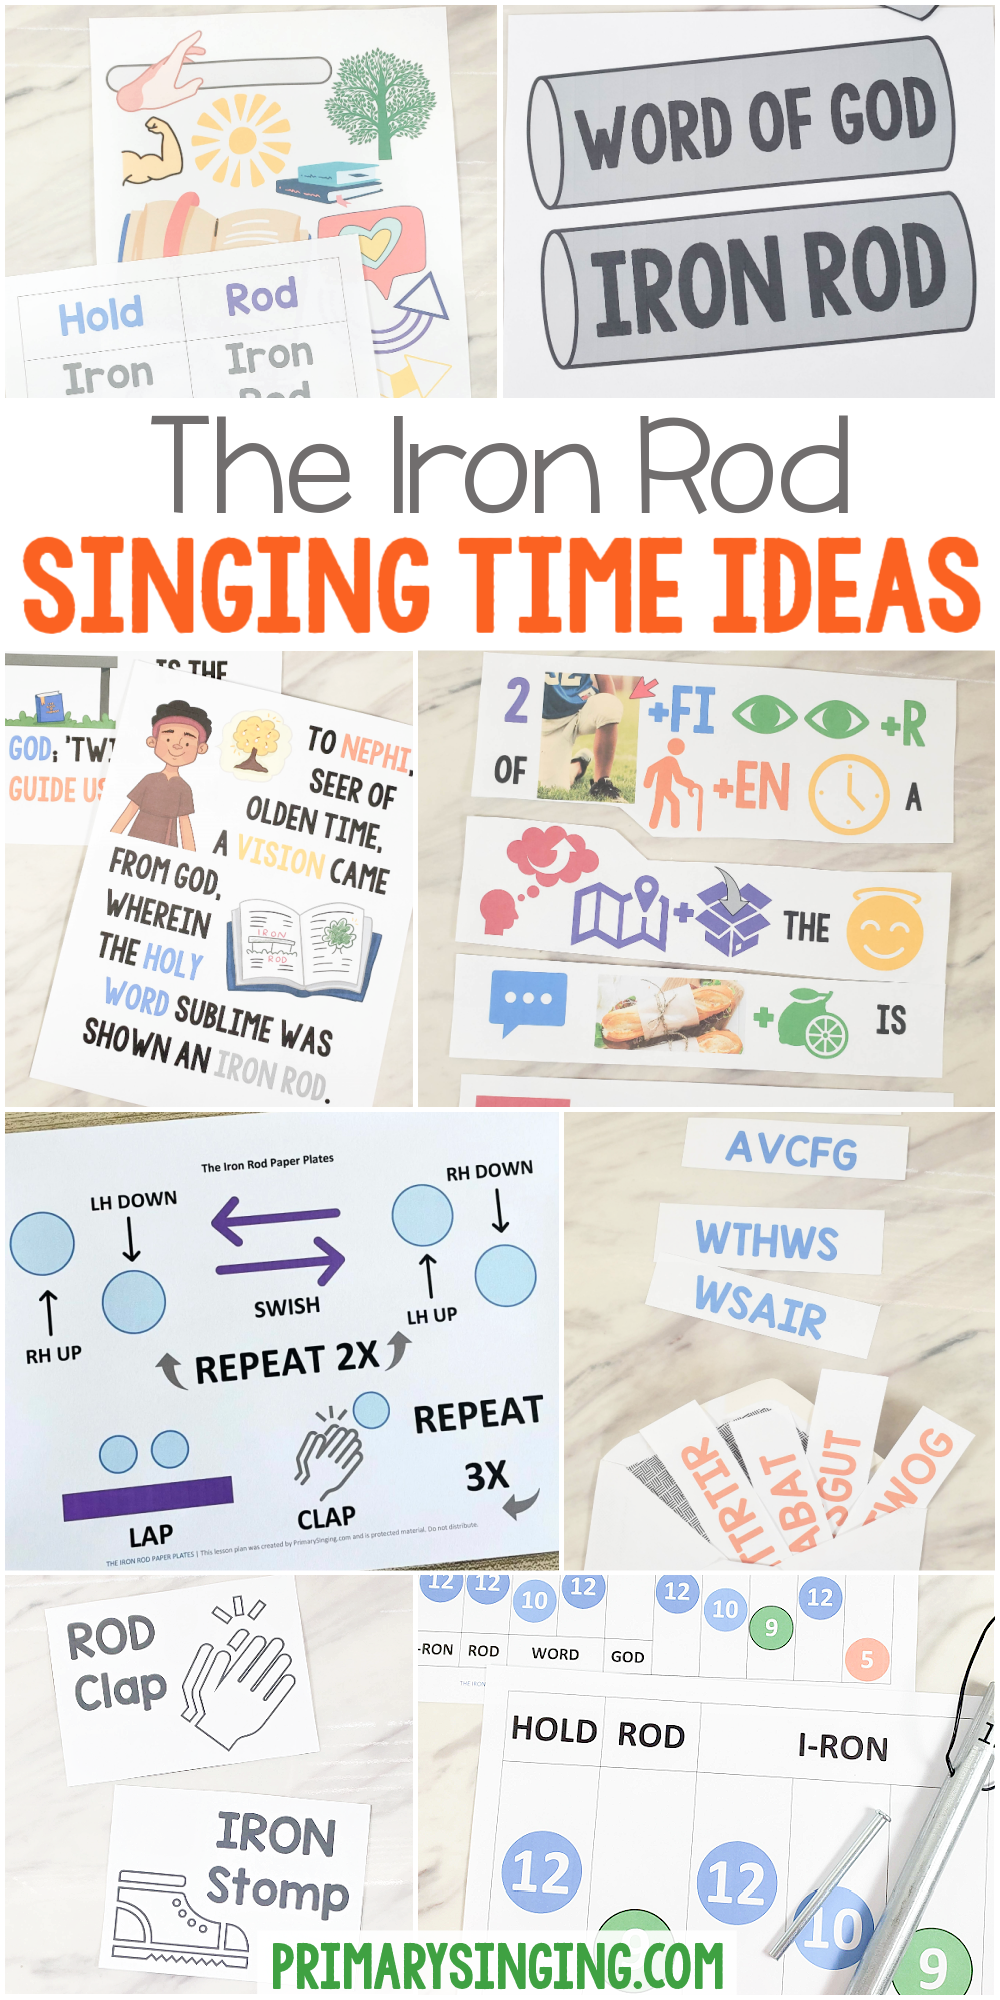 The Iron Rod singing time ideas fun ways to teach The Iron Rod hymn for LDS Primary music leaders including a custom art flip chart, paper plates, pipe chimes, song picture puzzle, first letters, mad gab, pass the iron rod and more.